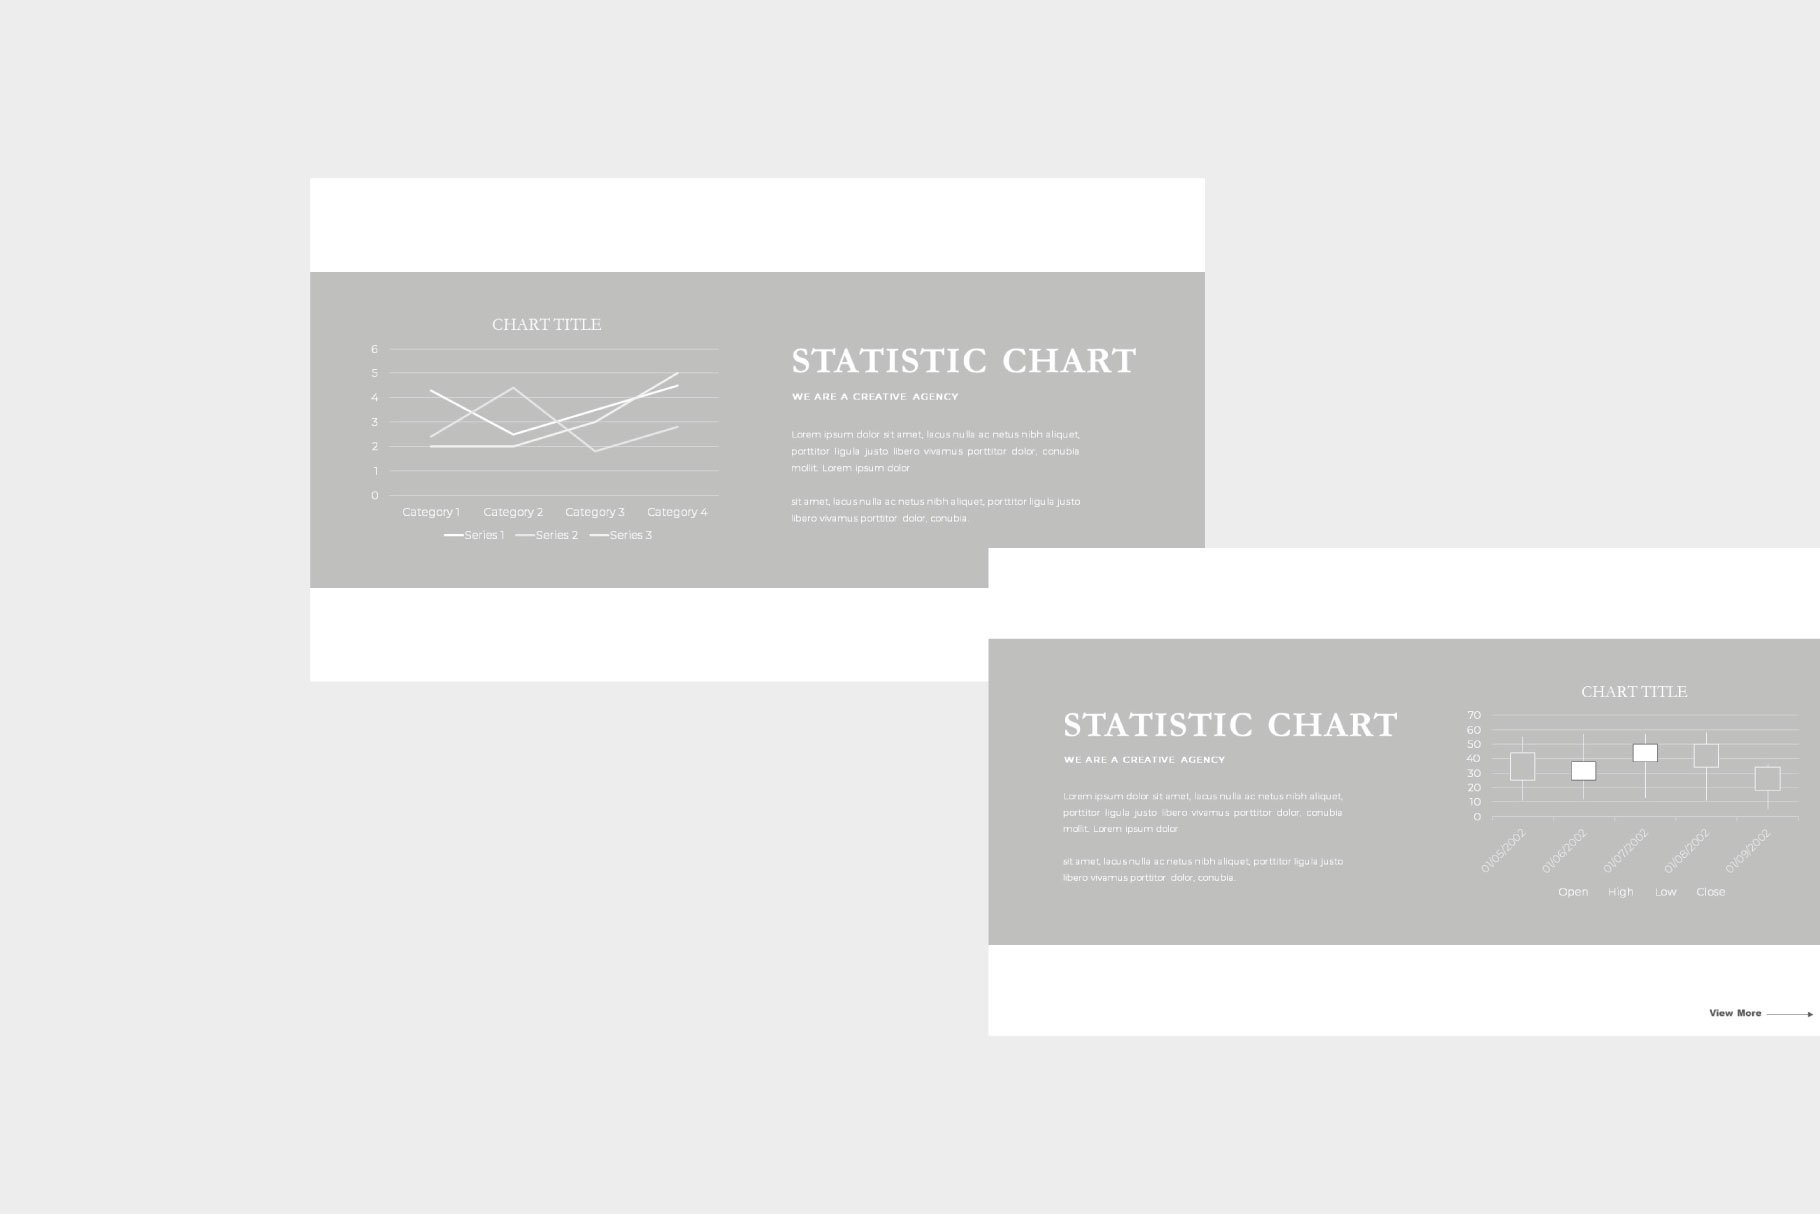 Slides with statistic chart.